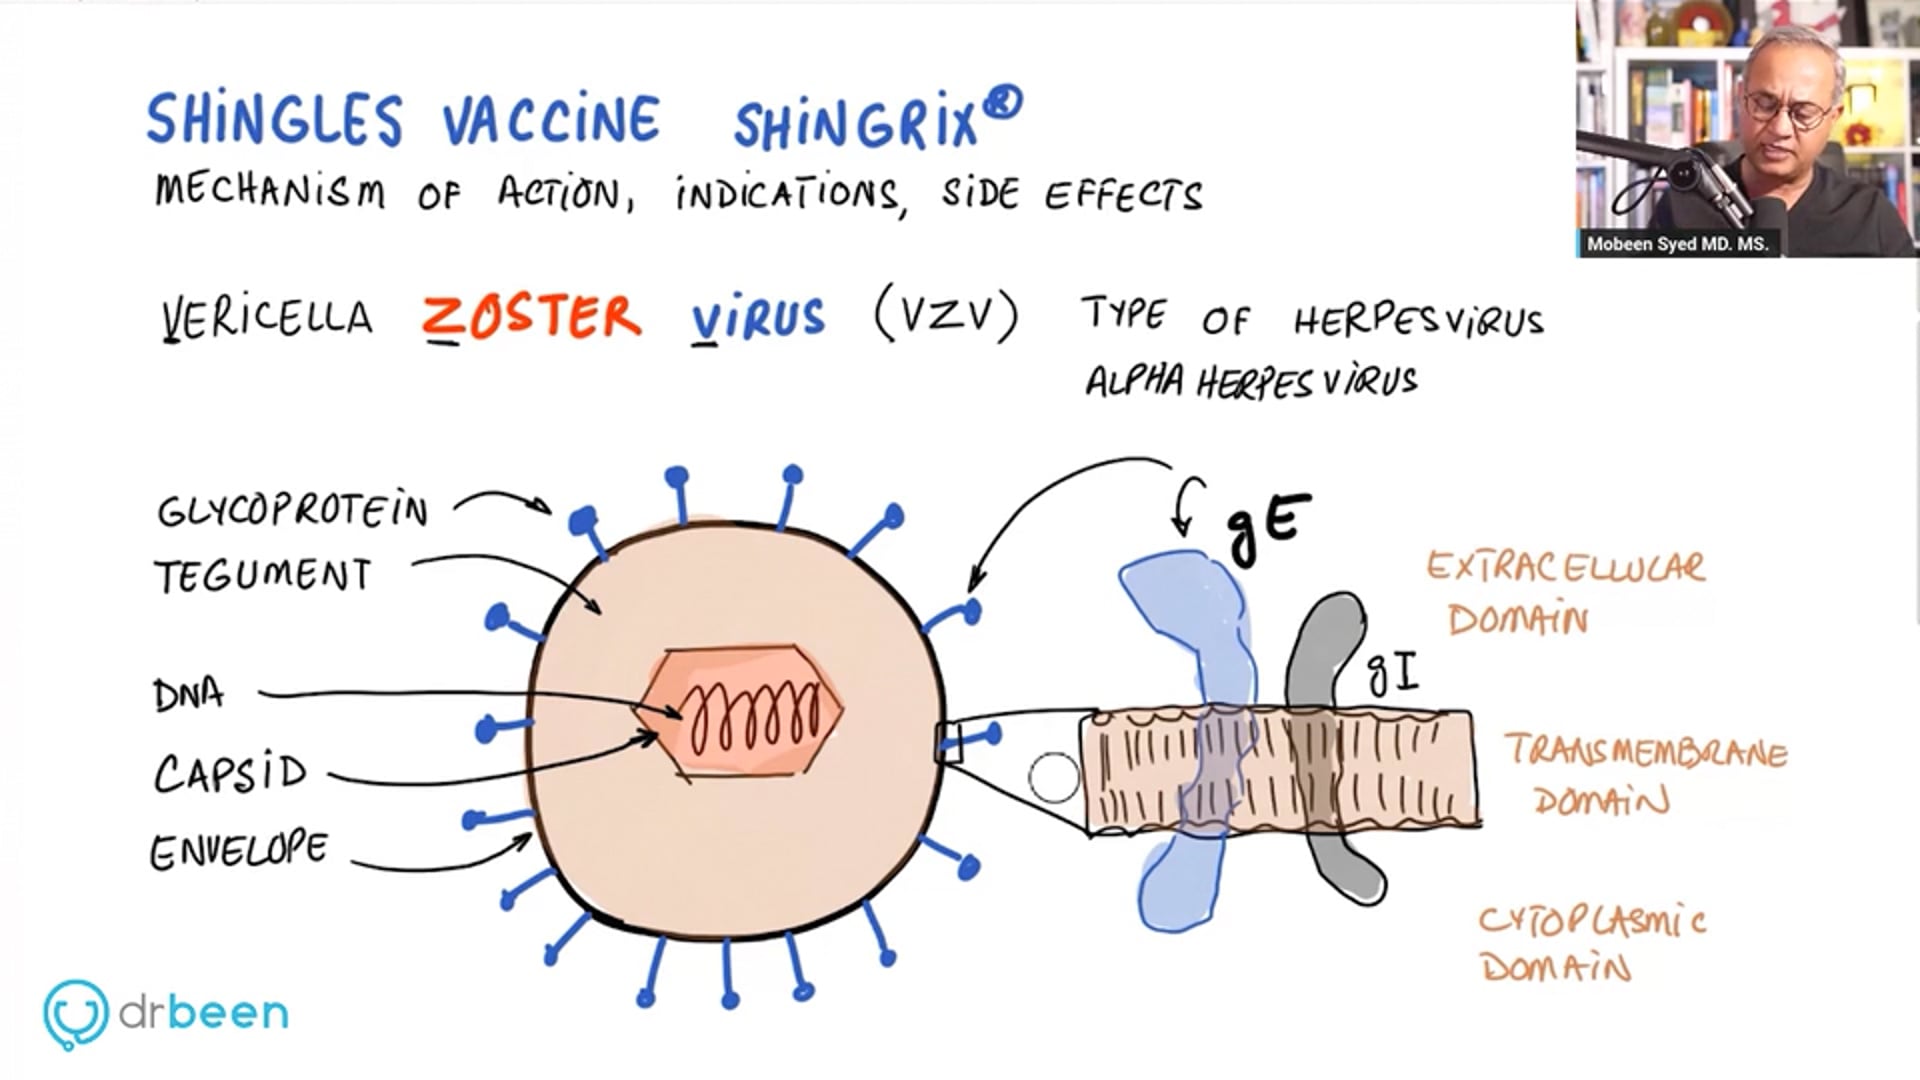 Shingles Vaccine Shingrix - Indications, Mechanism, and Side Effects